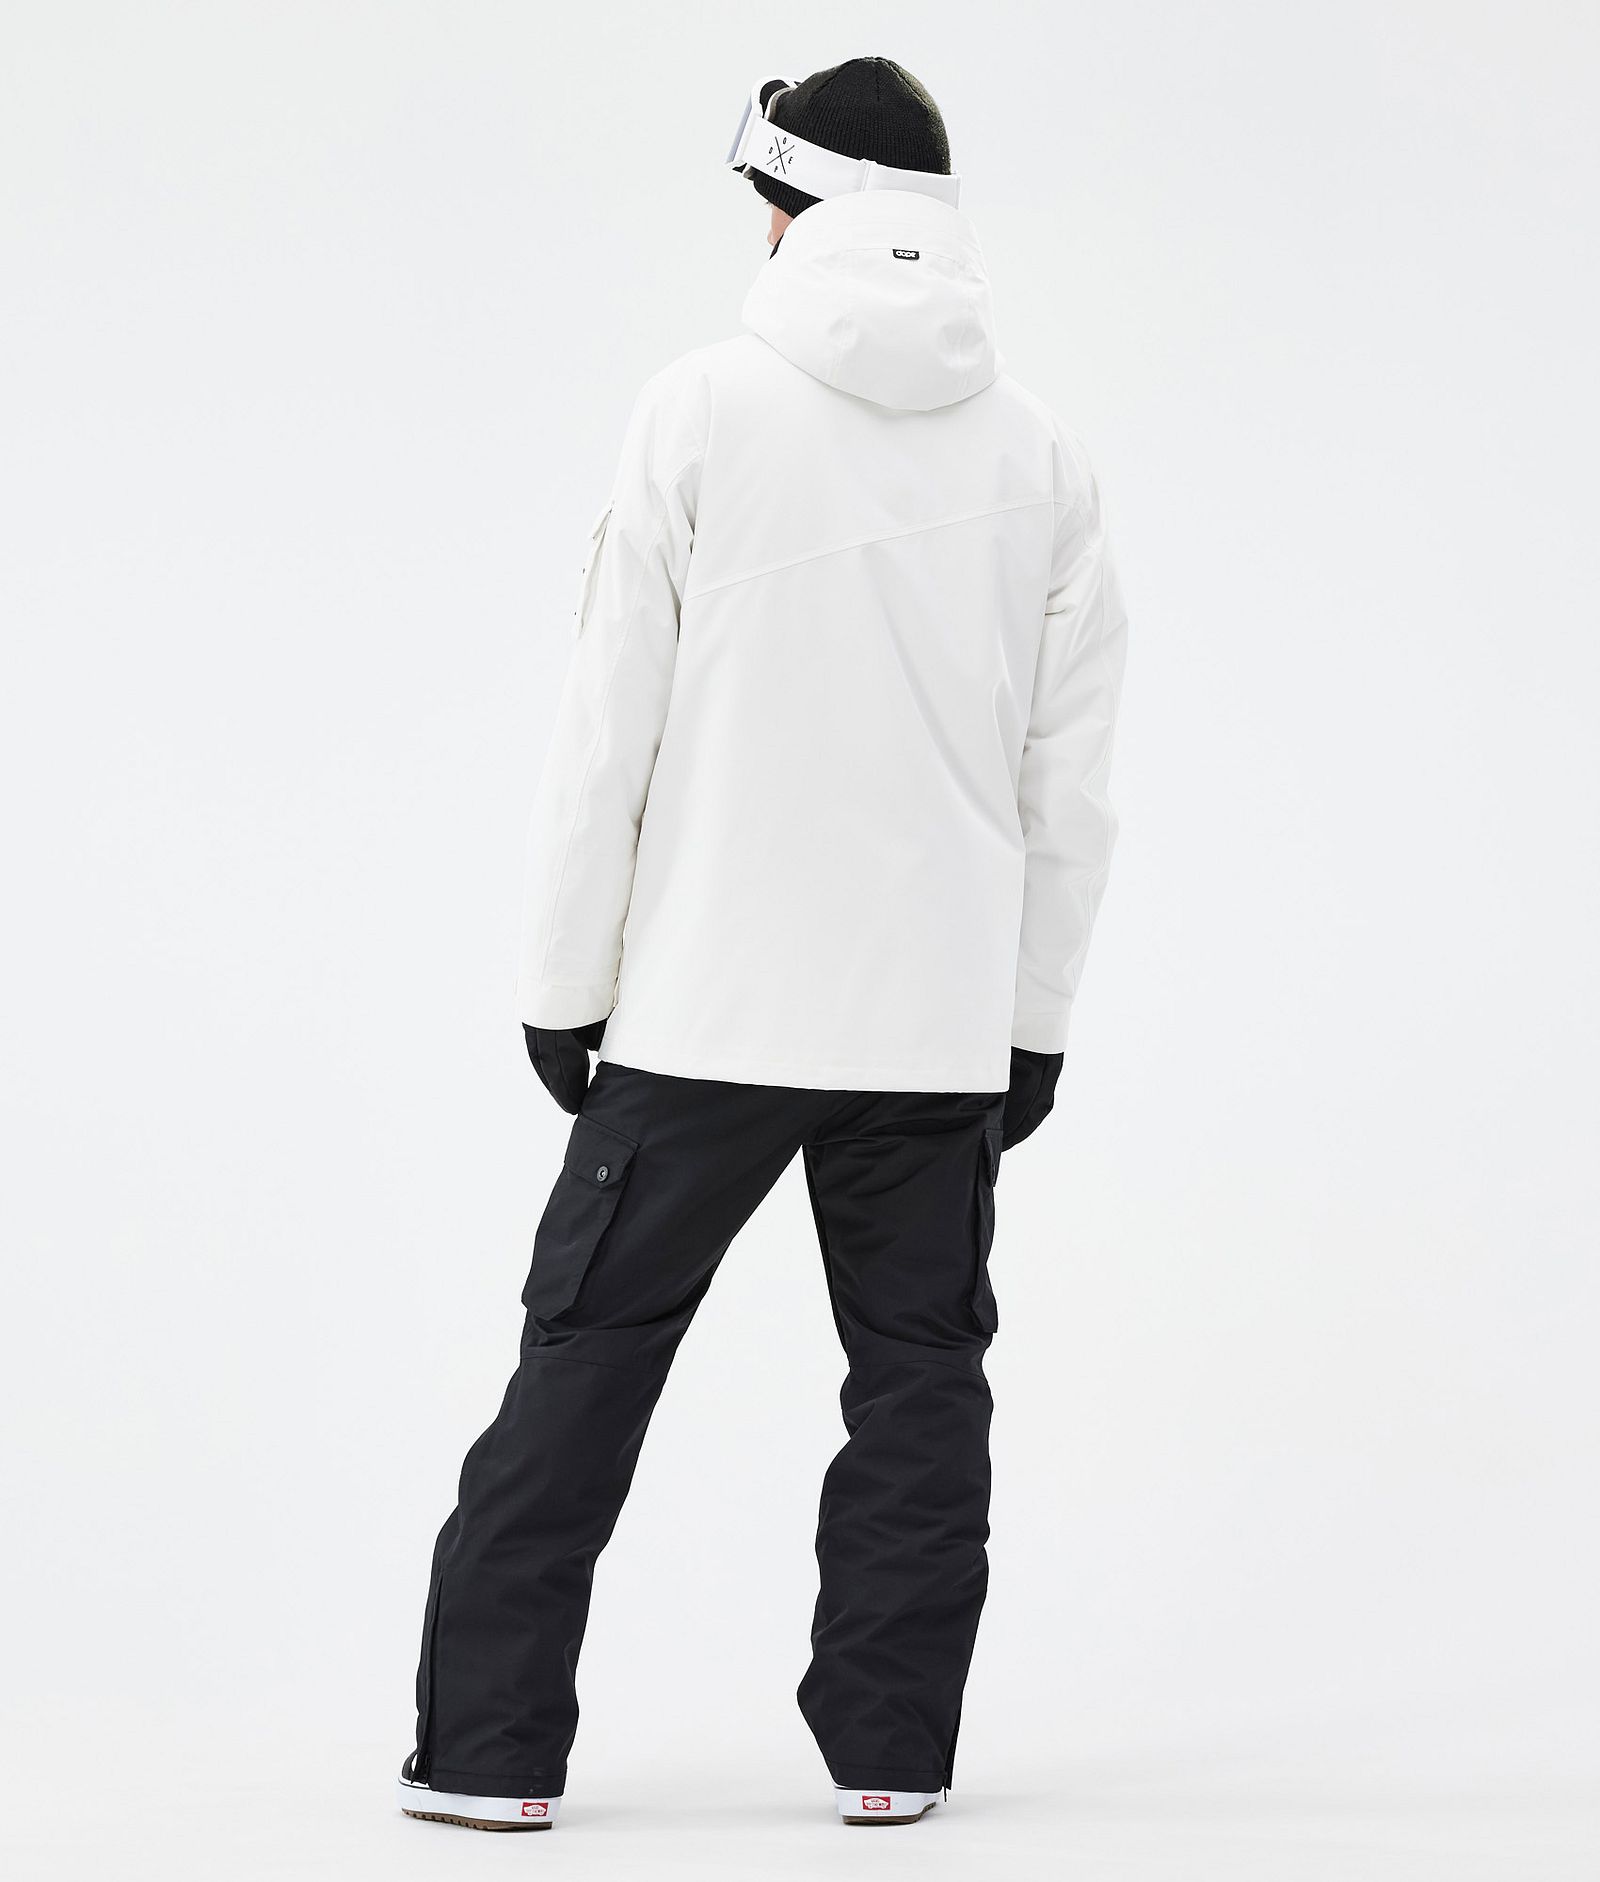 Adept Lumilautailu Outfit Miehet Old White/Blackout